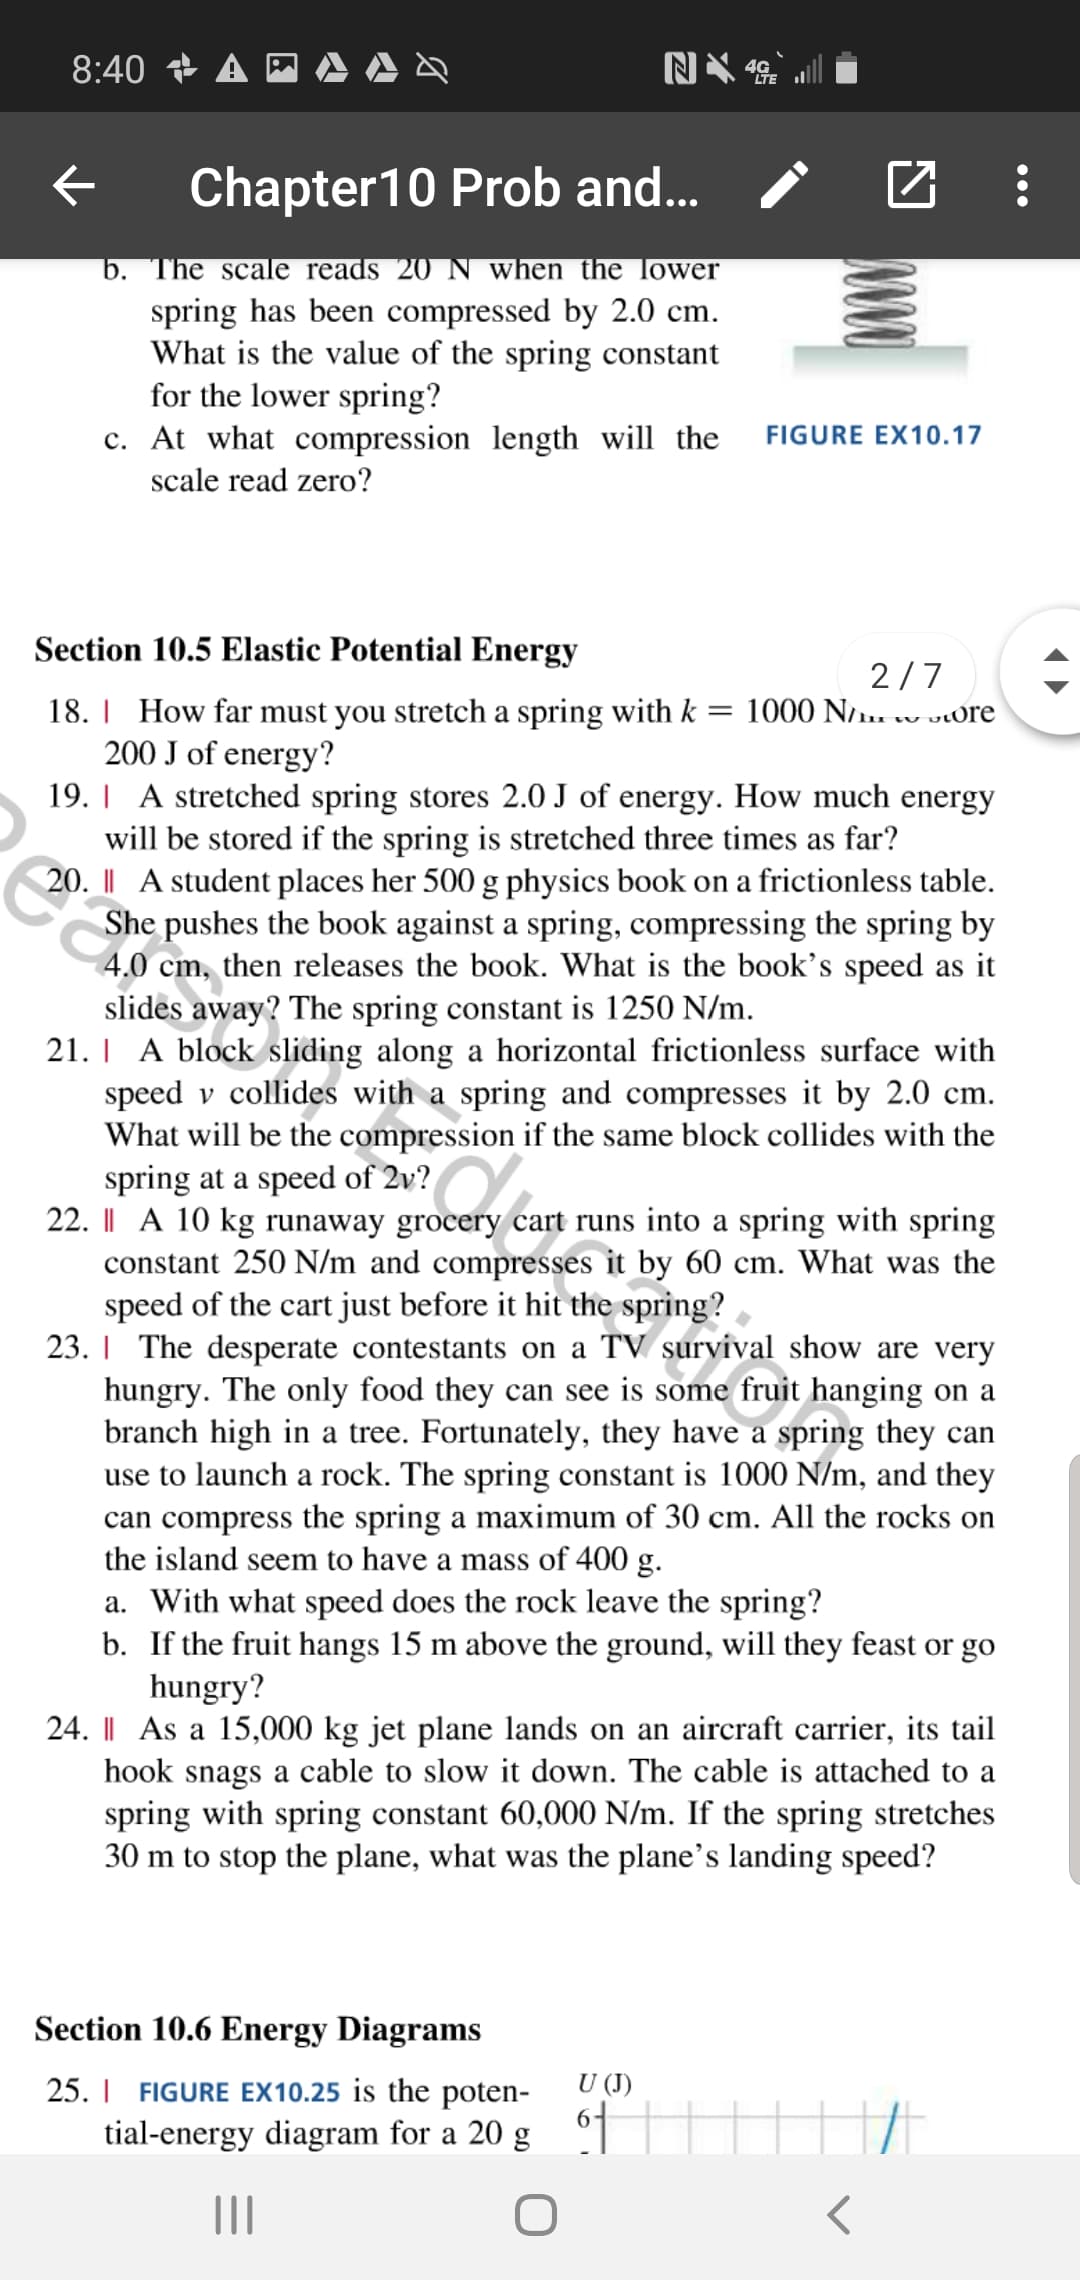 8:40 A
Chapter 10 Prob and...
b. The scale reads 20 N when the lower
spring has been compressed by 2.0 cm
What is the value of the spring constant
for the lower spring?
c. At what compression length will the
FIGURE EX10.17
scale read zero?
Section 10.5 Elastic Potential Energy
2/7
18. How far must you stretch a spring with k = 1000 N/i. vOre
200 J of energy?
19. A stretched spring stores 2.0 J of energy. How much energy
will be stored if the spring is stretched three times as far?
20. A student places her 500 g physics book on a frictionless table
She pushes the book against a spring, compressing the spring by
4.0 cm, then releases the book. What is the book's speed as it
slides away? The spring constant is 1250 N/m
21. A block sliding along a horizontal frictionless surface with
speed v collides with a spring and compresses it by 2.0 cm.
What will be the compression if the same block collides with the
spring at a speed of 2v?
22. I A 10 kg runaway grocery cart runs into a spring with spring
constant 250 N/m and compresses it by 60 cm. What was the
speed of the cart just before it hit the spring?
23. The desperate contestants on a TV survival show are very
hungry. The only food they can see is some fruit hanging on a
branch high in a tree. Fortunately, they have a spring they can
use to launch a rock. The spring constant is 1000 N/m, and they
can compress the spring a maximum of 30 cm. All the rocks on
the island seem to have a mass of 400 g.
a. With what speed does the rock leave the spring?
b. If the fruit hangs 15 m above the ground, will they feast or go
hungry?
24. As a 15,000 kg jet plane lands on an aircraft carrier, its tail
hook snags a cable to slow it down. The cable is attached to a
spring with spring constant 60,000 N/m. If the spring stretches
30 m to stop the plane, what was the plane's landing speed?
Section 10.6 Energy Diagrams
U (J
25. FIGURE EX10.25 is the poten-
6
tial-energy diagram for a 20 g
